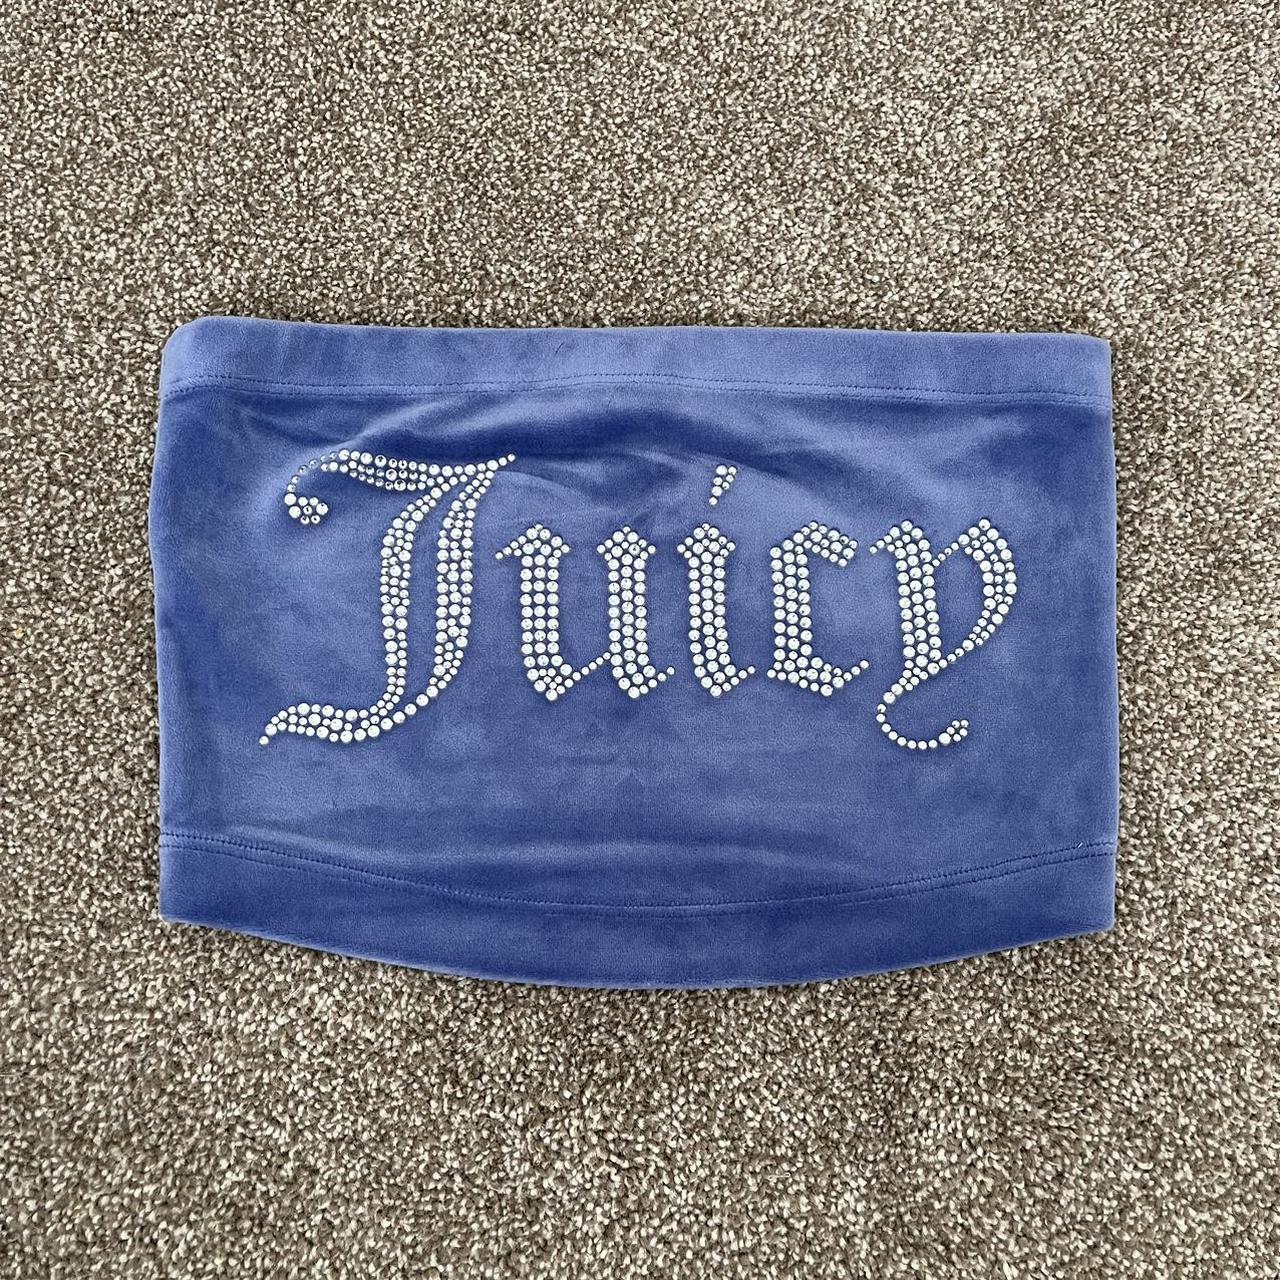 Juicy couture crop top Like new barely worn Size... - Depop